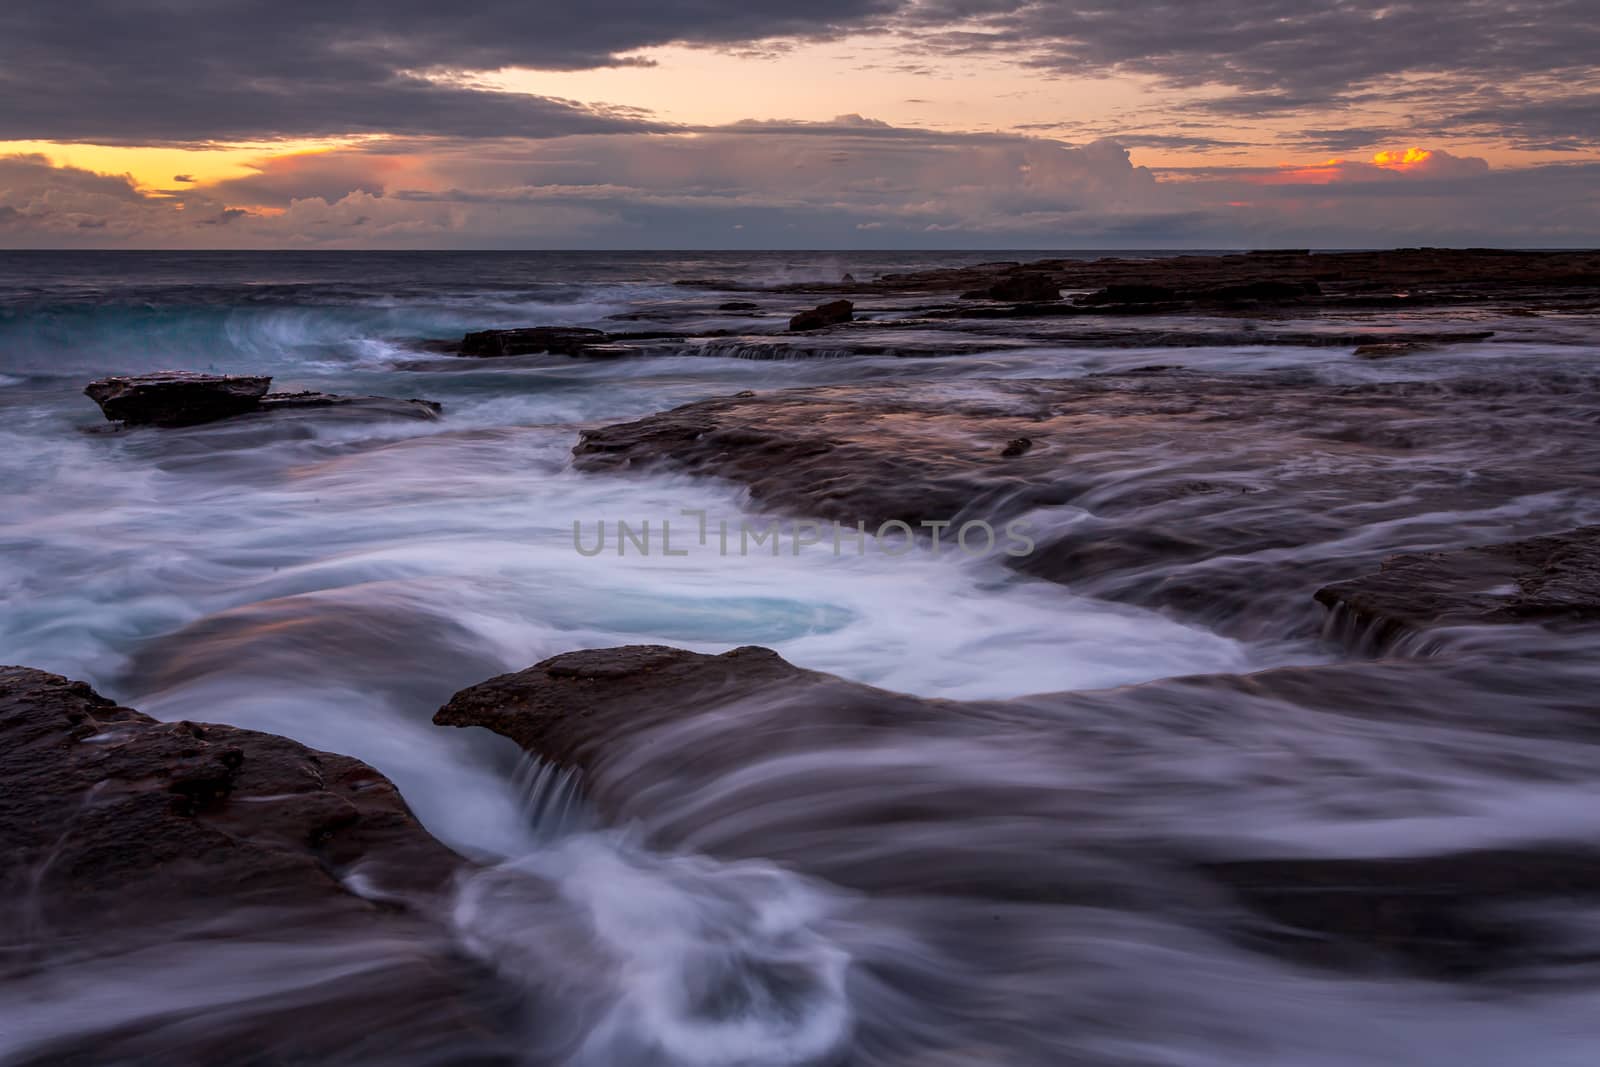 Early morning sunrise views from the edge of the rocky coastline of Coalcliff in the  Illawarra region Australia